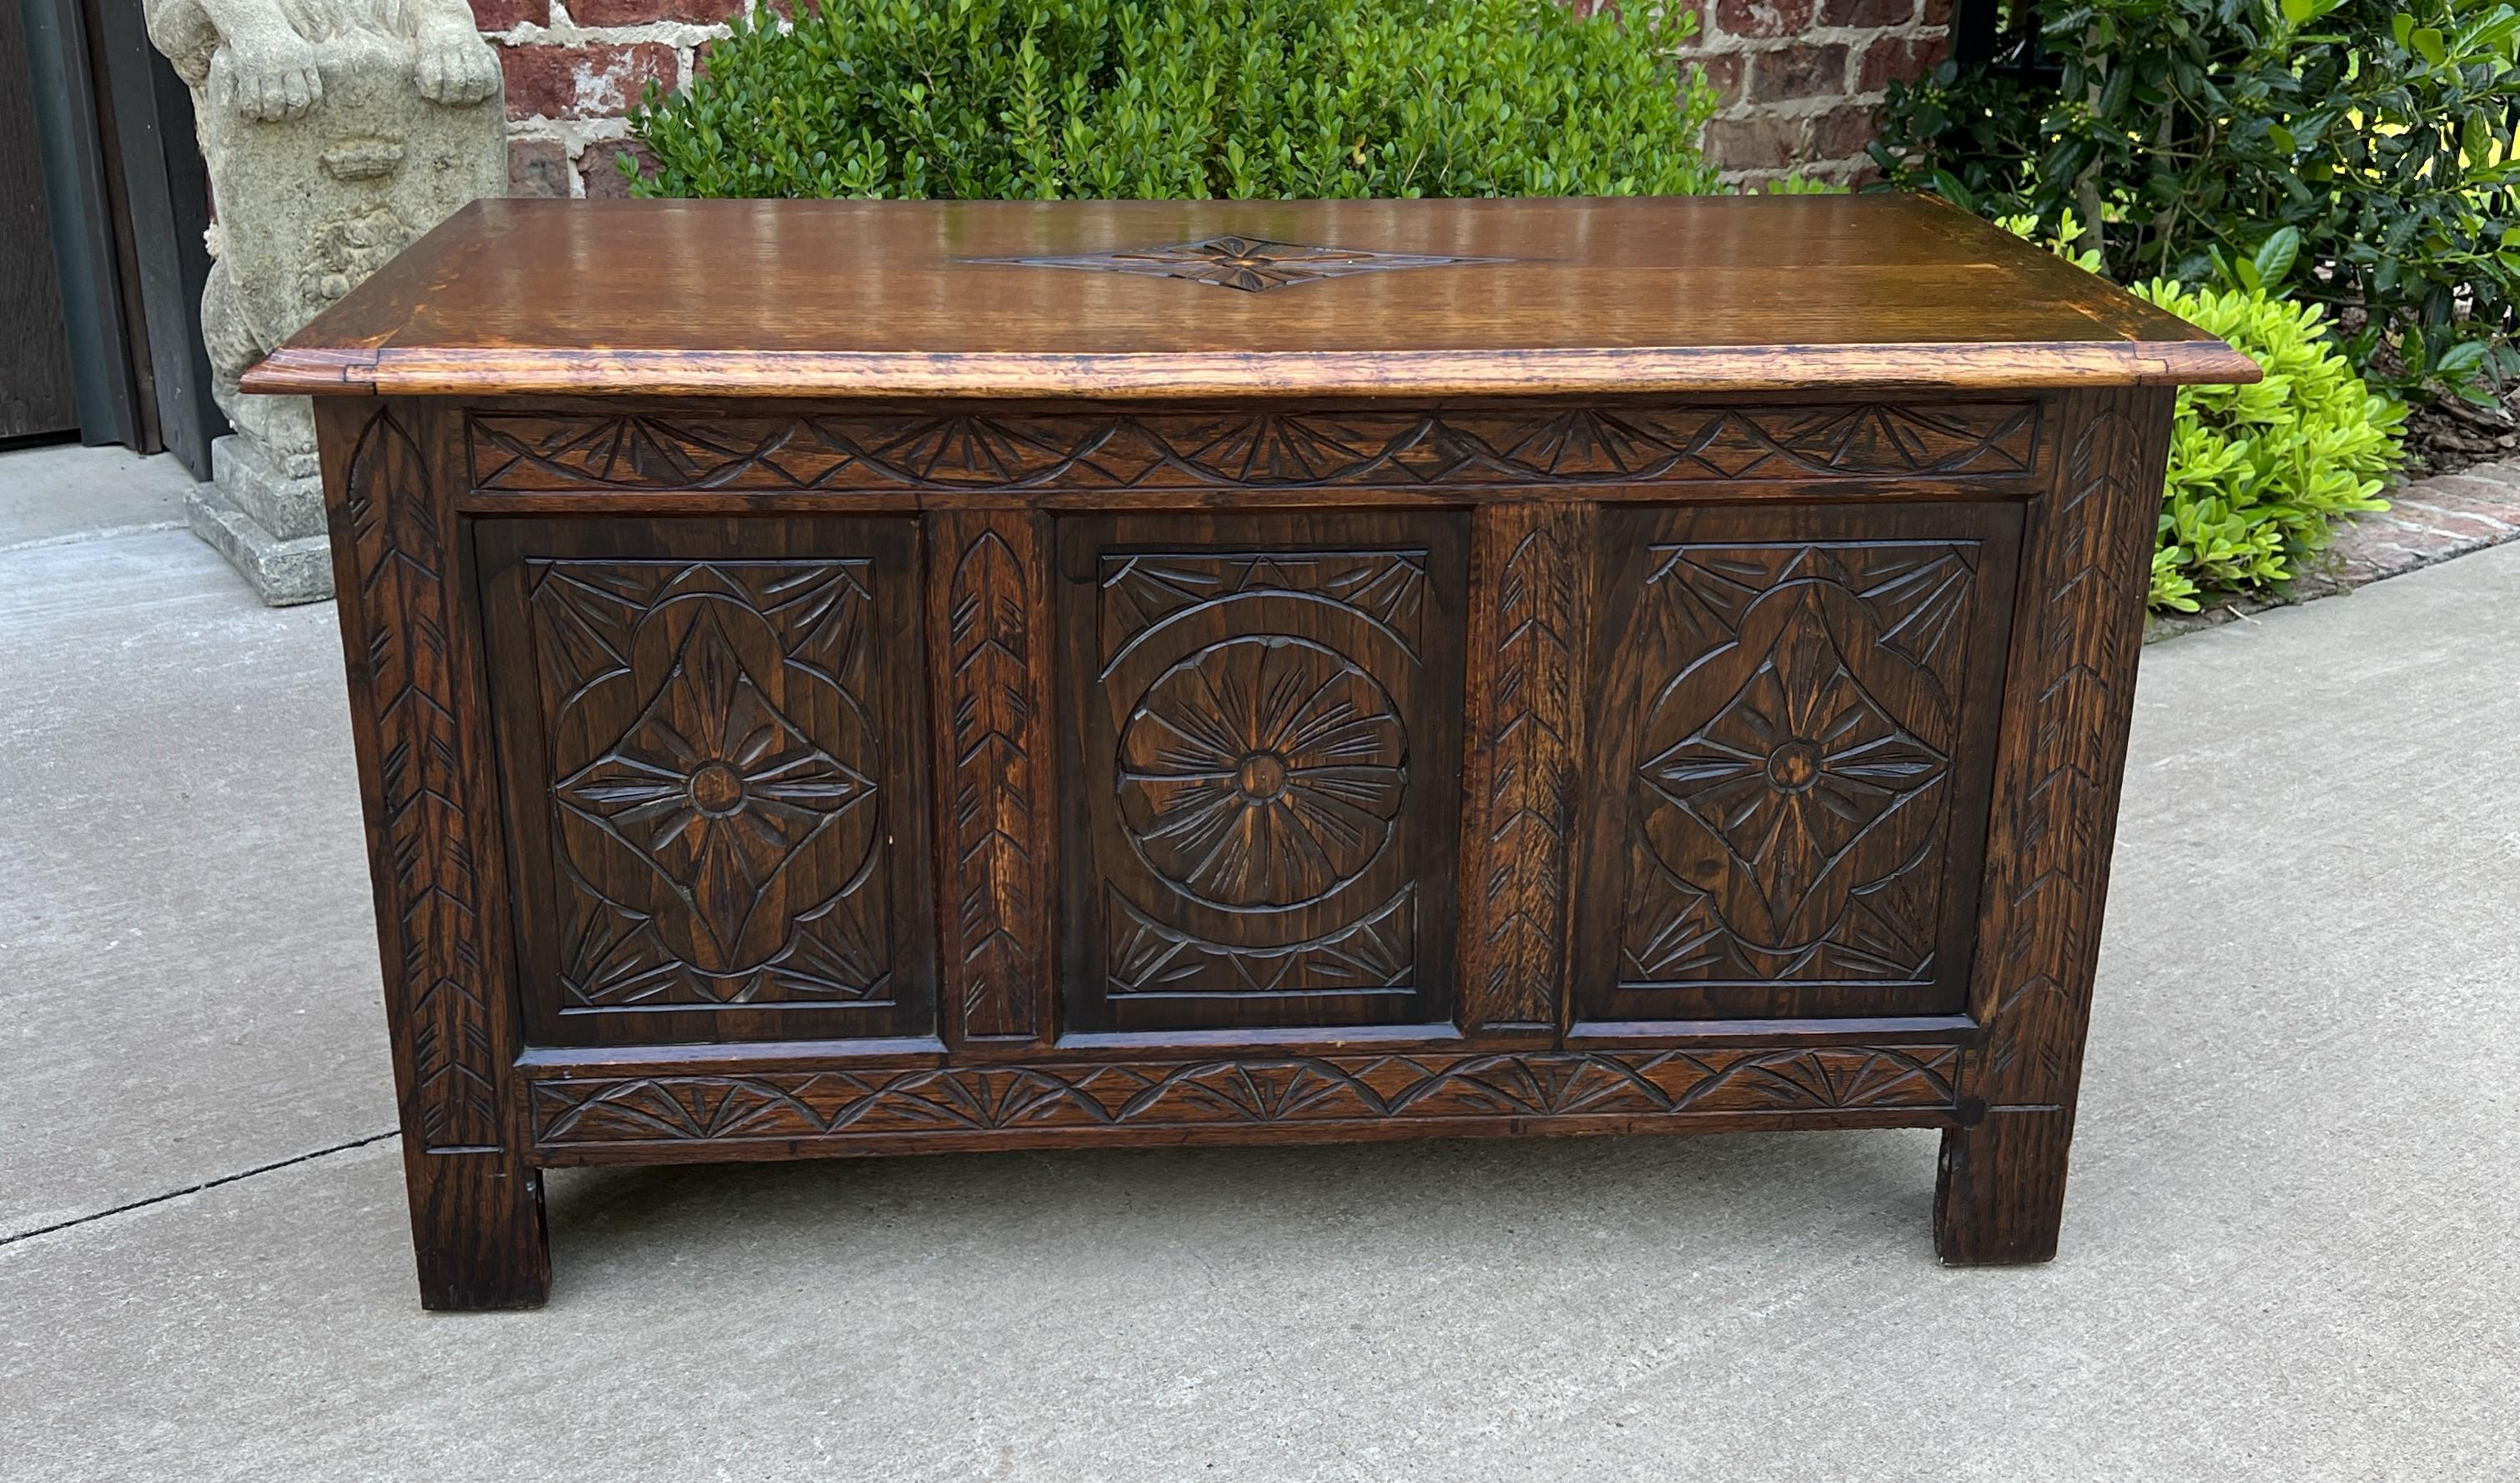 CHARMING Antique English Carved Oak Blanket Box, Coffer, Trunk, Storage Chest, Coffee Table or Bench~~c. 1920s

 The perfect size for a coffee table, toy box or at the foot of a bed. Nicely carved and a wonderful size~~ 

FULL of